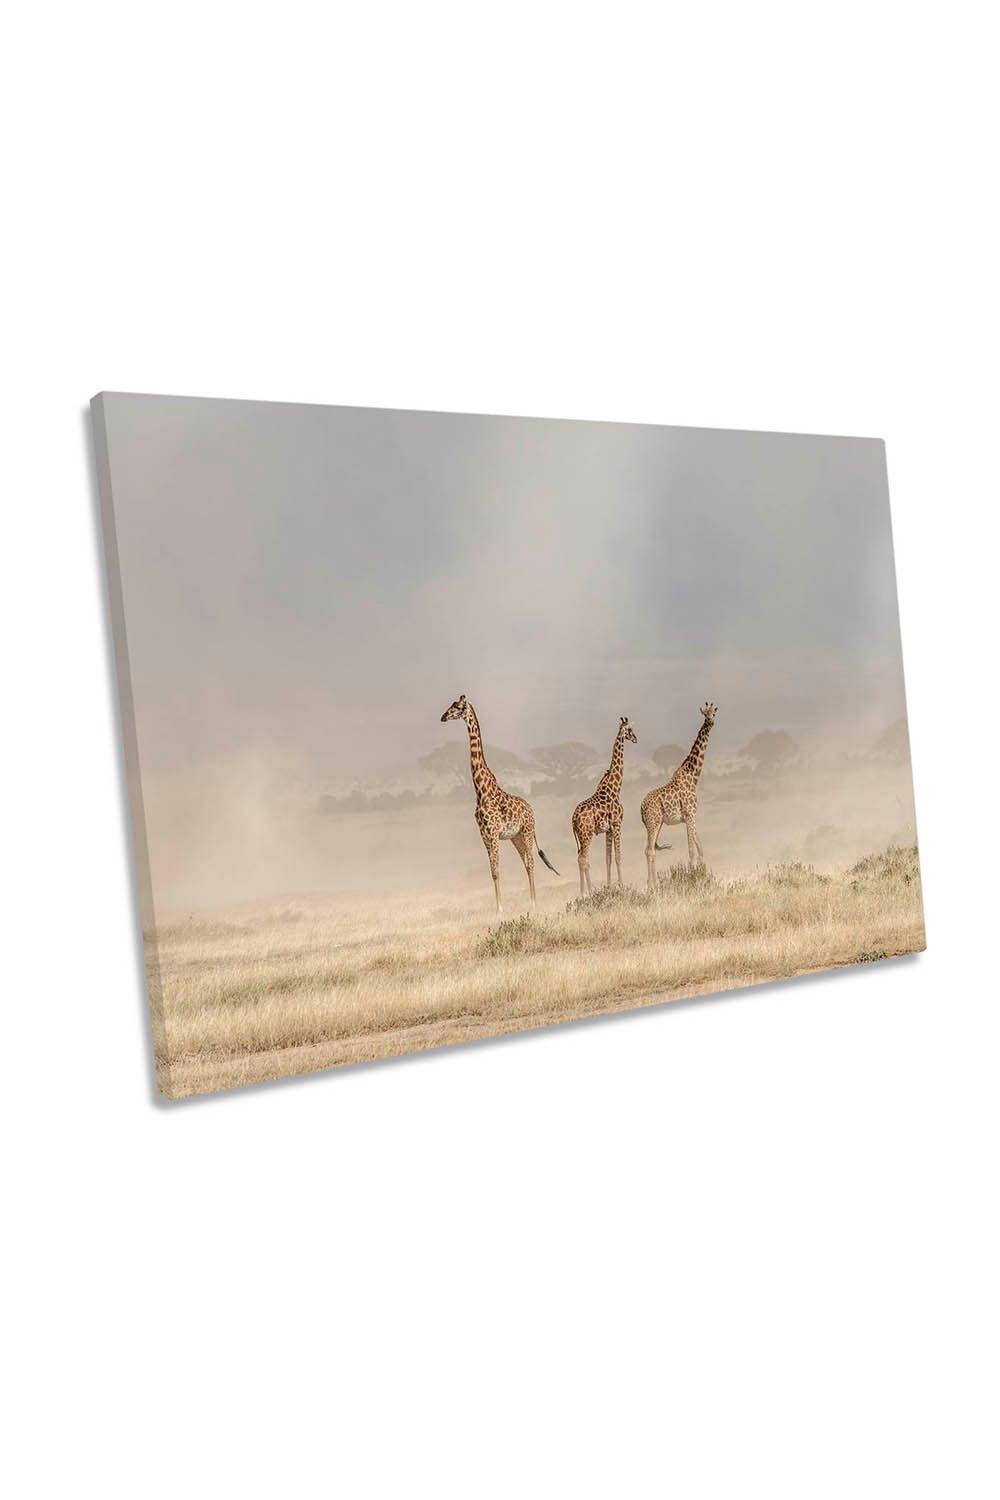 Weathering the Dust Giraffes Canvas Wall Art Picture Print